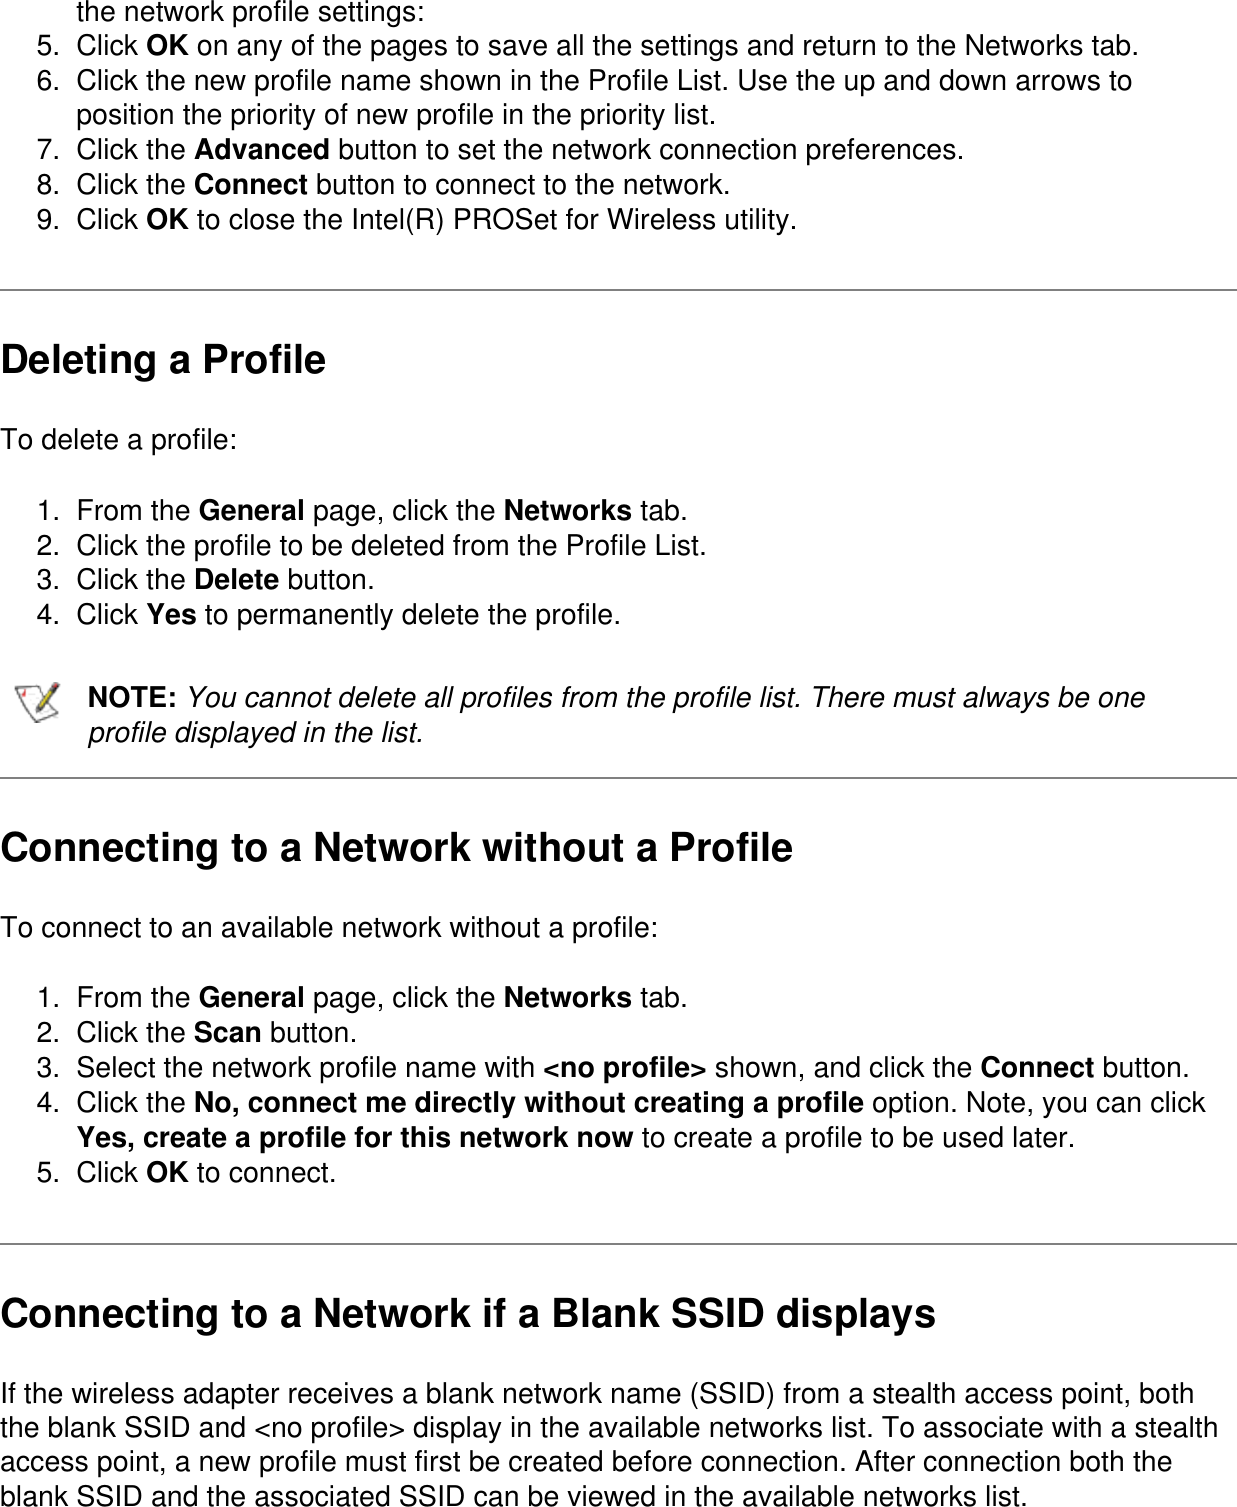 the network profile settings:5.  Click OK on any of the pages to save all the settings and return to the Networks tab.6.  Click the new profile name shown in the Profile List. Use the up and down arrows to position the priority of new profile in the priority list.7.  Click the Advanced button to set the network connection preferences.8.  Click the Connect button to connect to the network.9.  Click OK to close the Intel(R) PROSet for Wireless utility.Deleting a ProfileTo delete a profile:1.  From the General page, click the Networks tab.2.  Click the profile to be deleted from the Profile List.3.  Click the Delete button.4.  Click Yes to permanently delete the profile.NOTE: You cannot delete all profiles from the profile list. There must always be one profile displayed in the list.Connecting to a Network without a ProfileTo connect to an available network without a profile:1.  From the General page, click the Networks tab.2.  Click the Scan button.3.  Select the network profile name with &lt;no profile&gt; shown, and click the Connect button.4.  Click the No, connect me directly without creating a profile option. Note, you can click Yes, create a profile for this network now to create a profile to be used later.5.  Click OK to connect.Connecting to a Network if a Blank SSID displaysIf the wireless adapter receives a blank network name (SSID) from a stealth access point, both the blank SSID and &lt;no profile&gt; display in the available networks list. To associate with a stealth access point, a new profile must first be created before connection. After connection both the blank SSID and the associated SSID can be viewed in the available networks list.